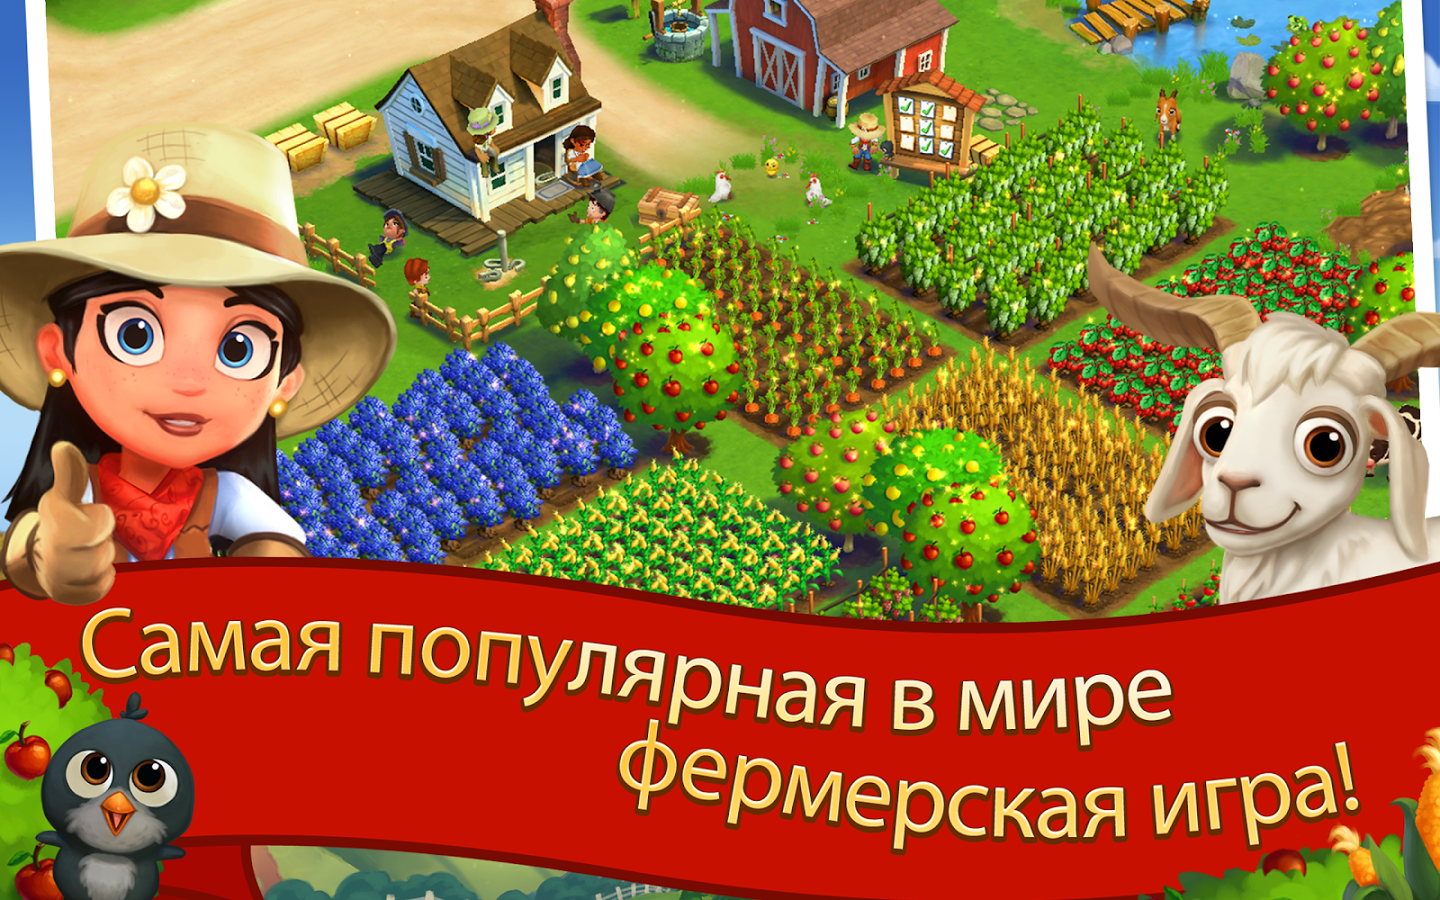 what are the task for boat race and top contributor in farmville country escape 2